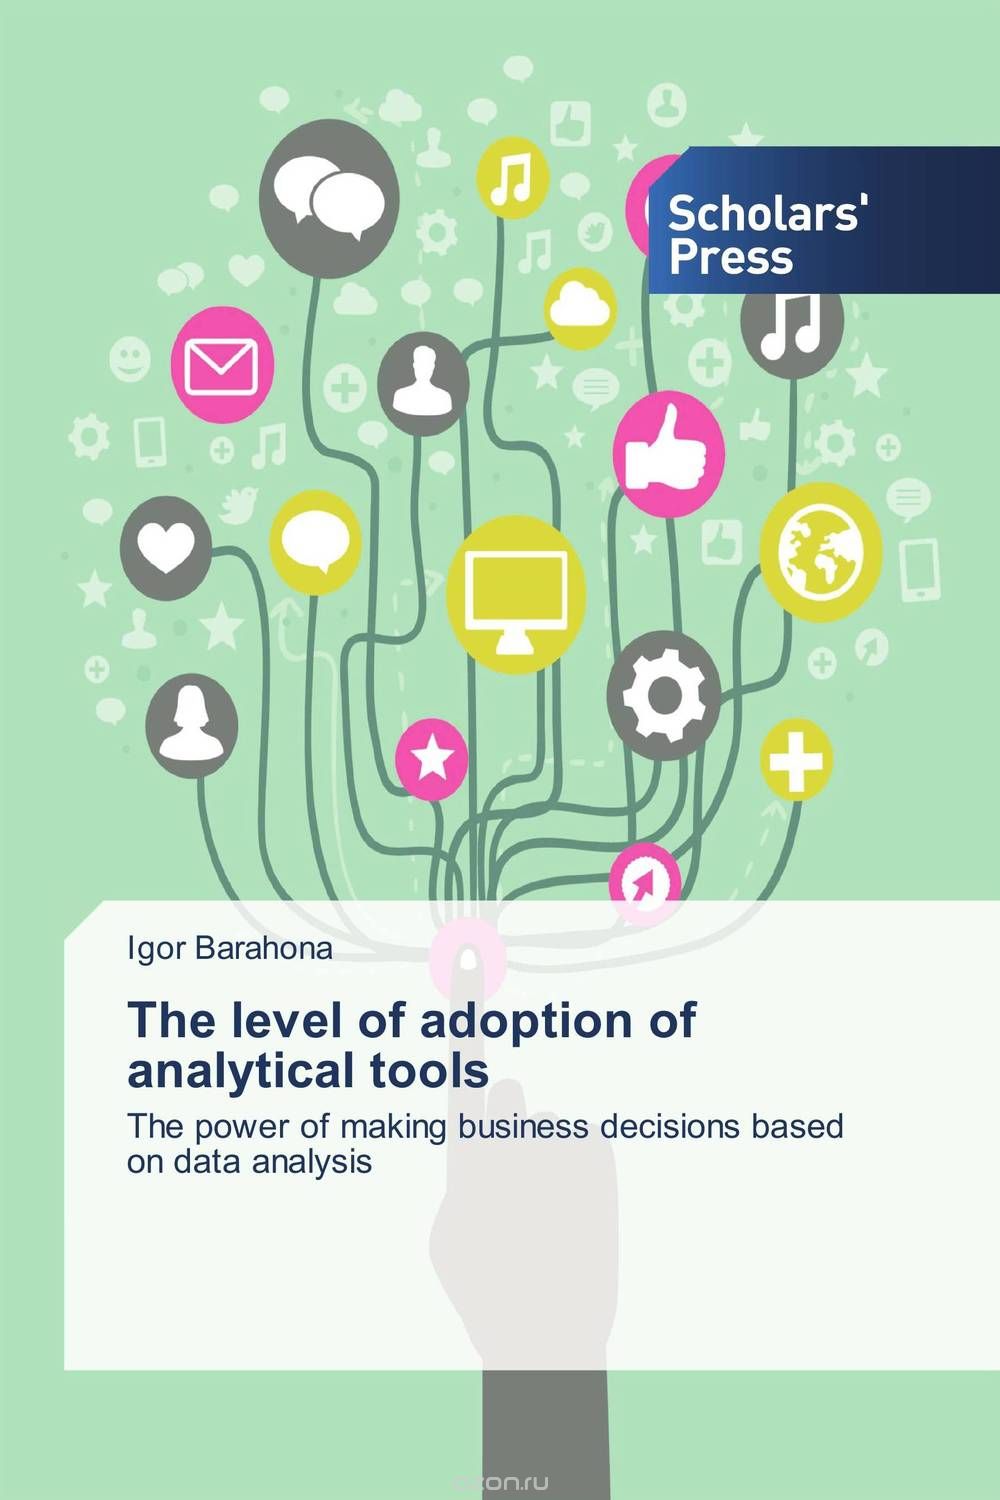 The level of adoption of analytical tools